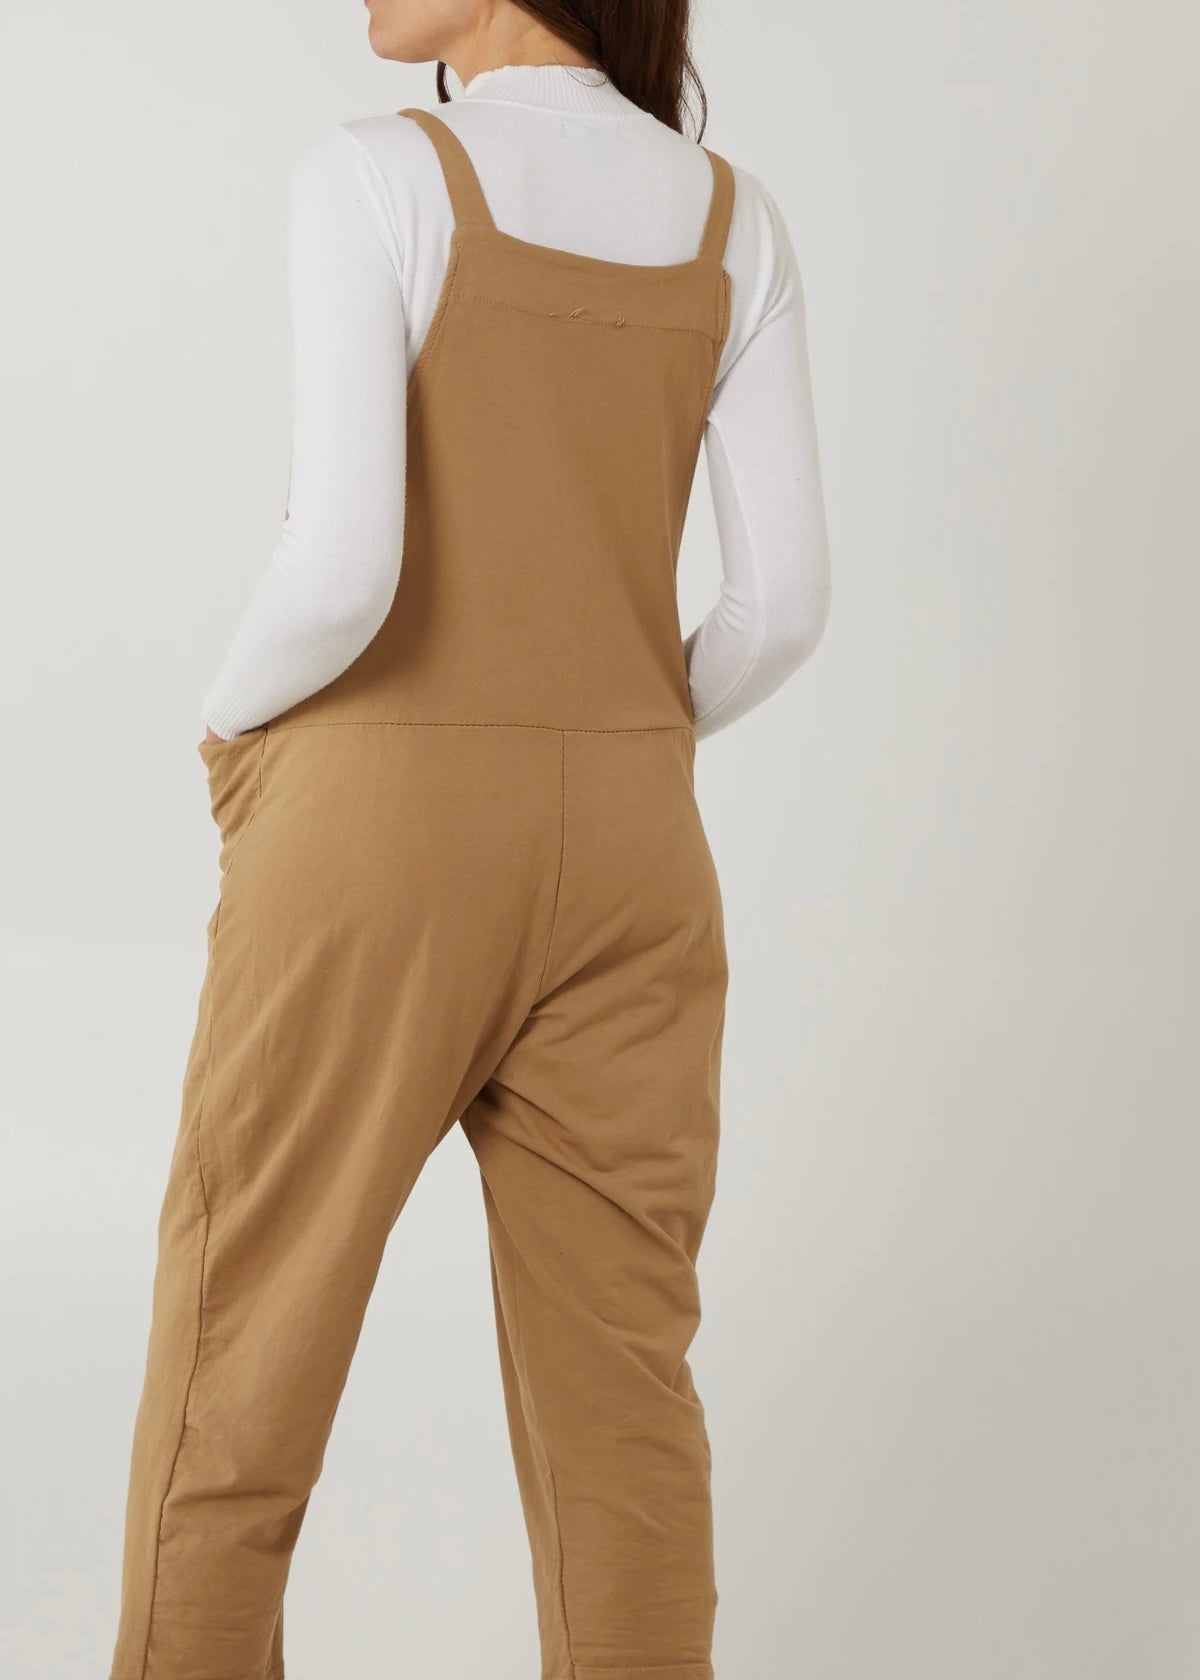 Plain jersey dungarees with tie straps in mustard